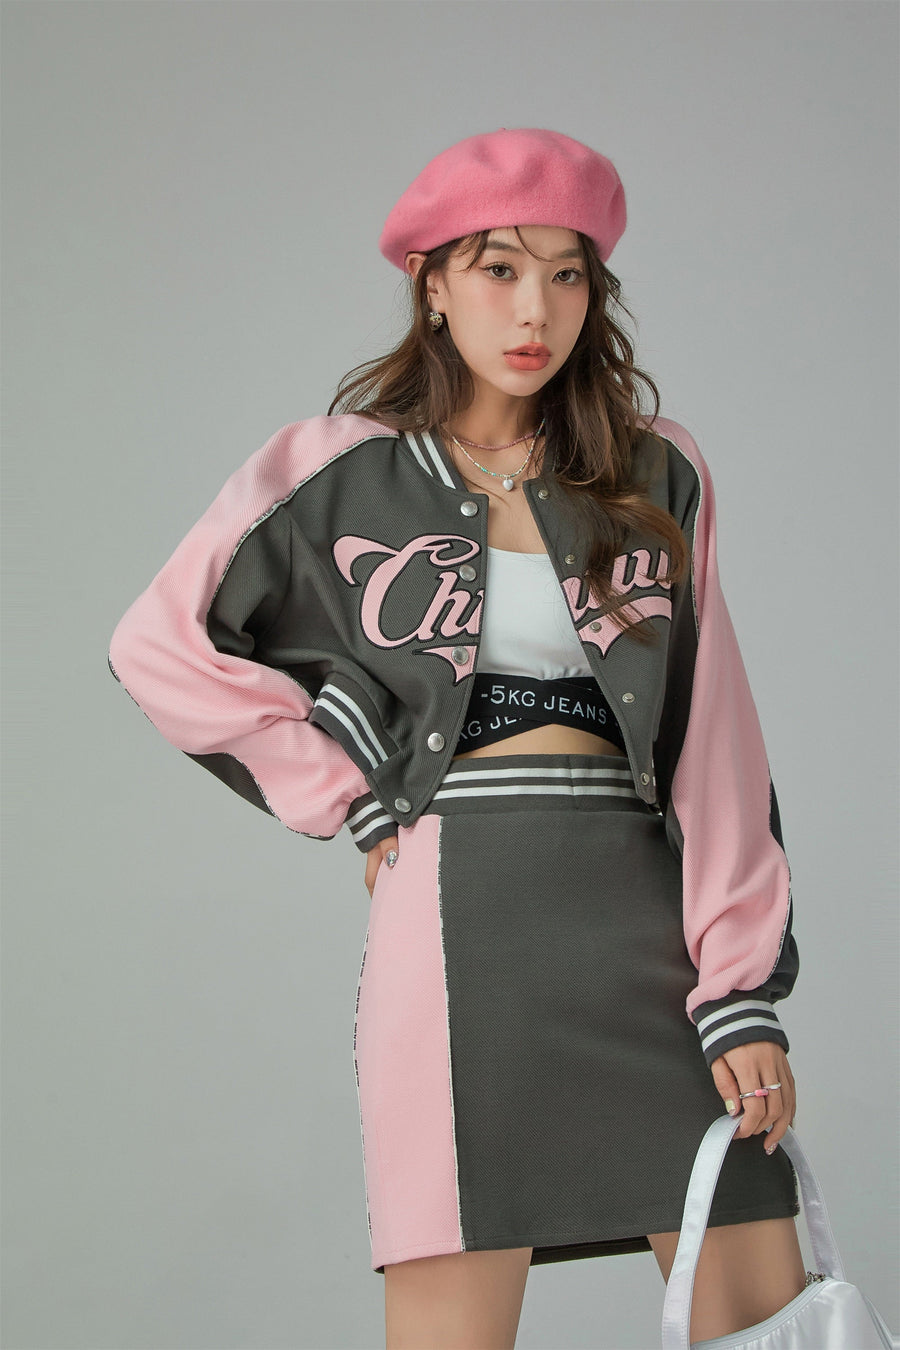 Joining Forces Crop Baseball Jacket